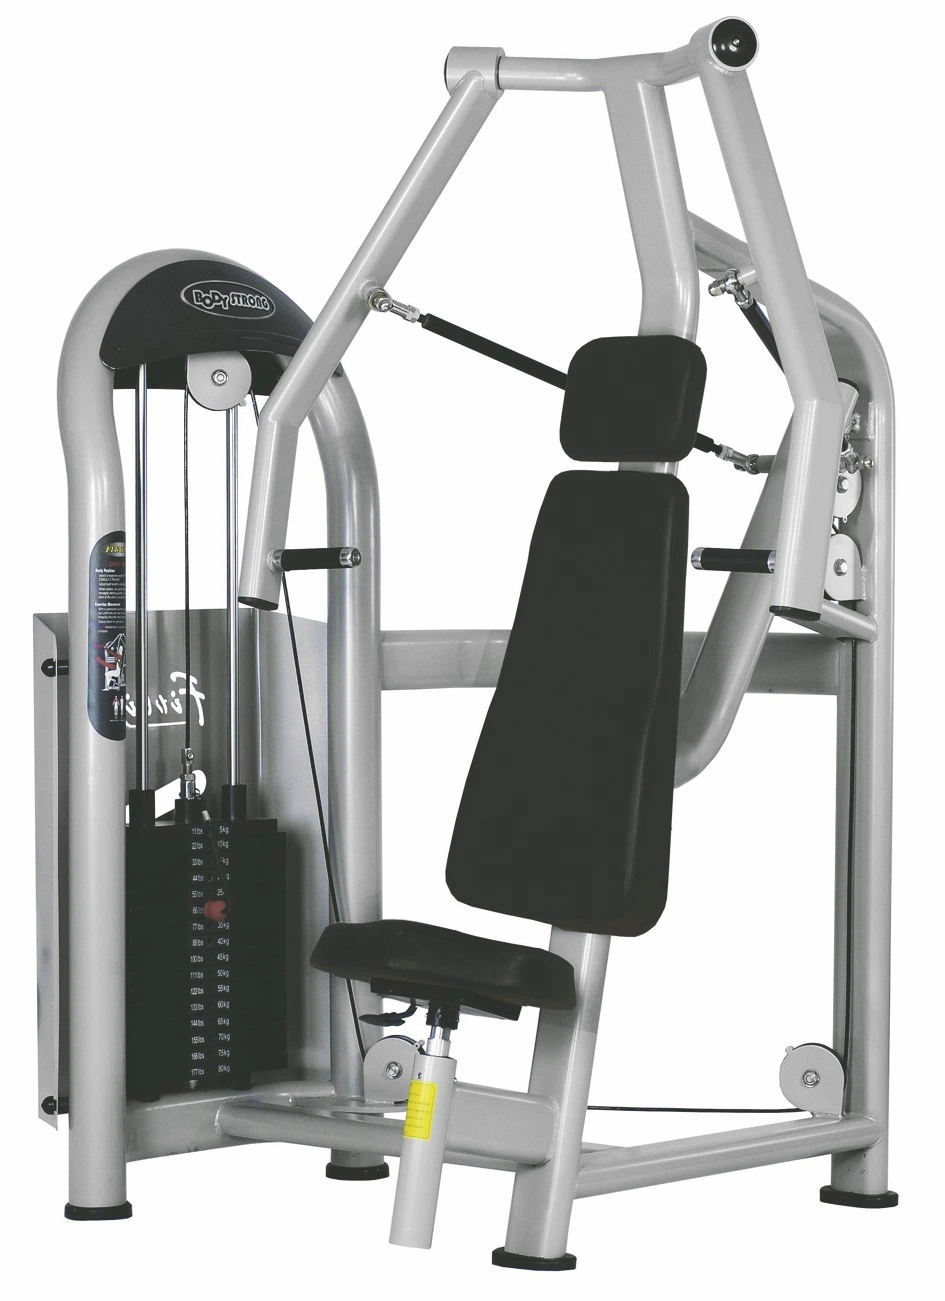 A6-001 Seated Chest Press/Strength Machine/Fitness Equipment